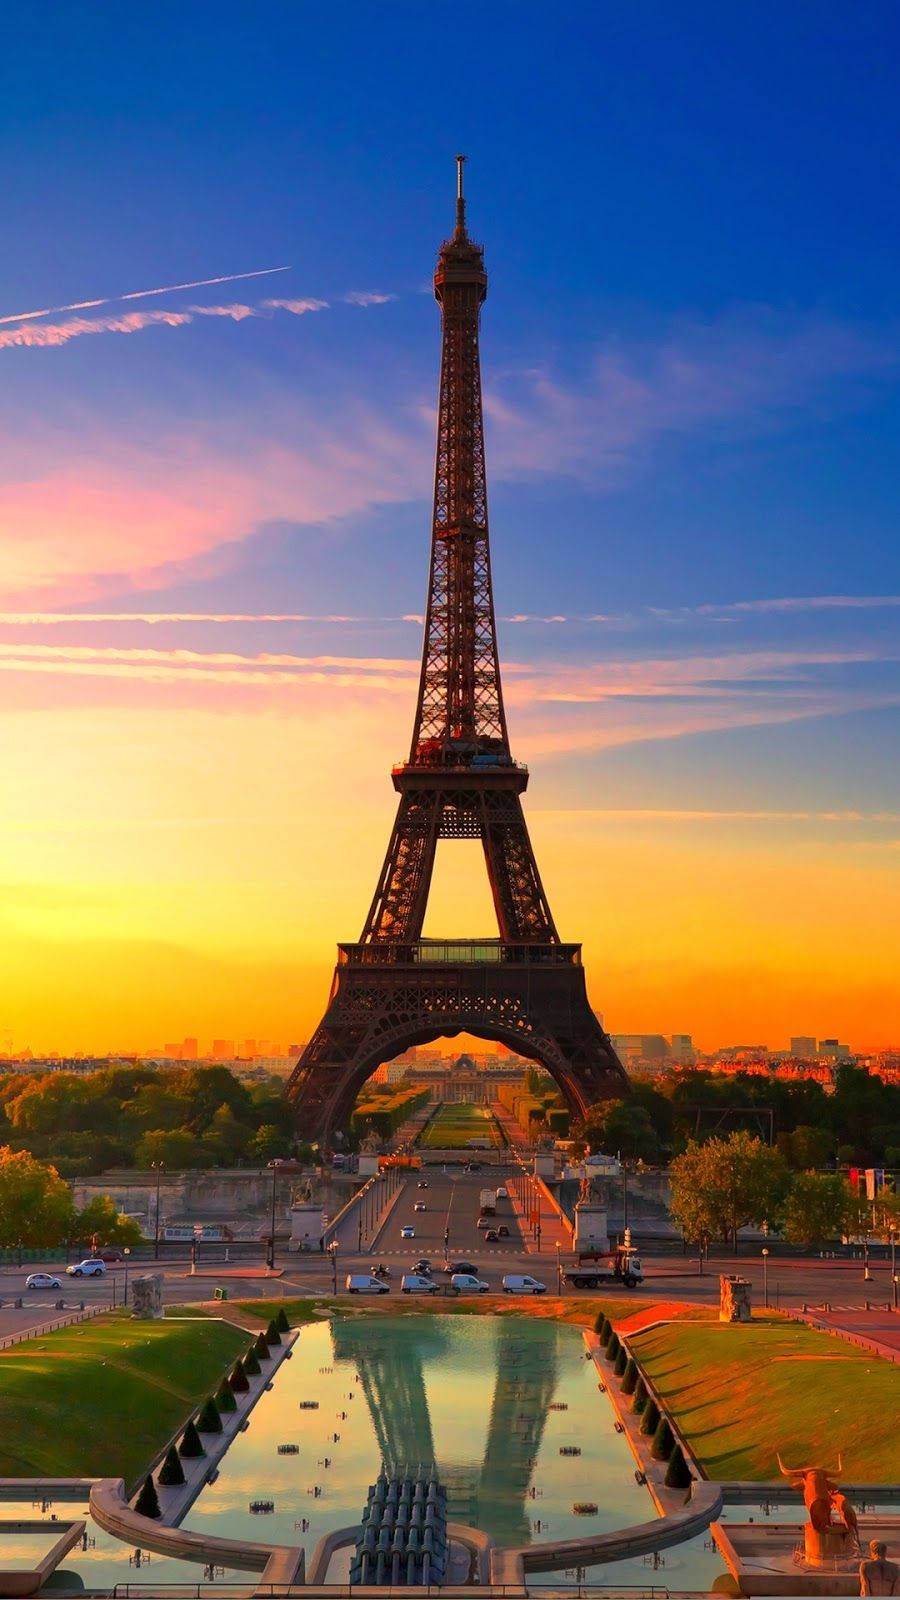 The Eiffel Tower in the City of Paris, France Wallpaper